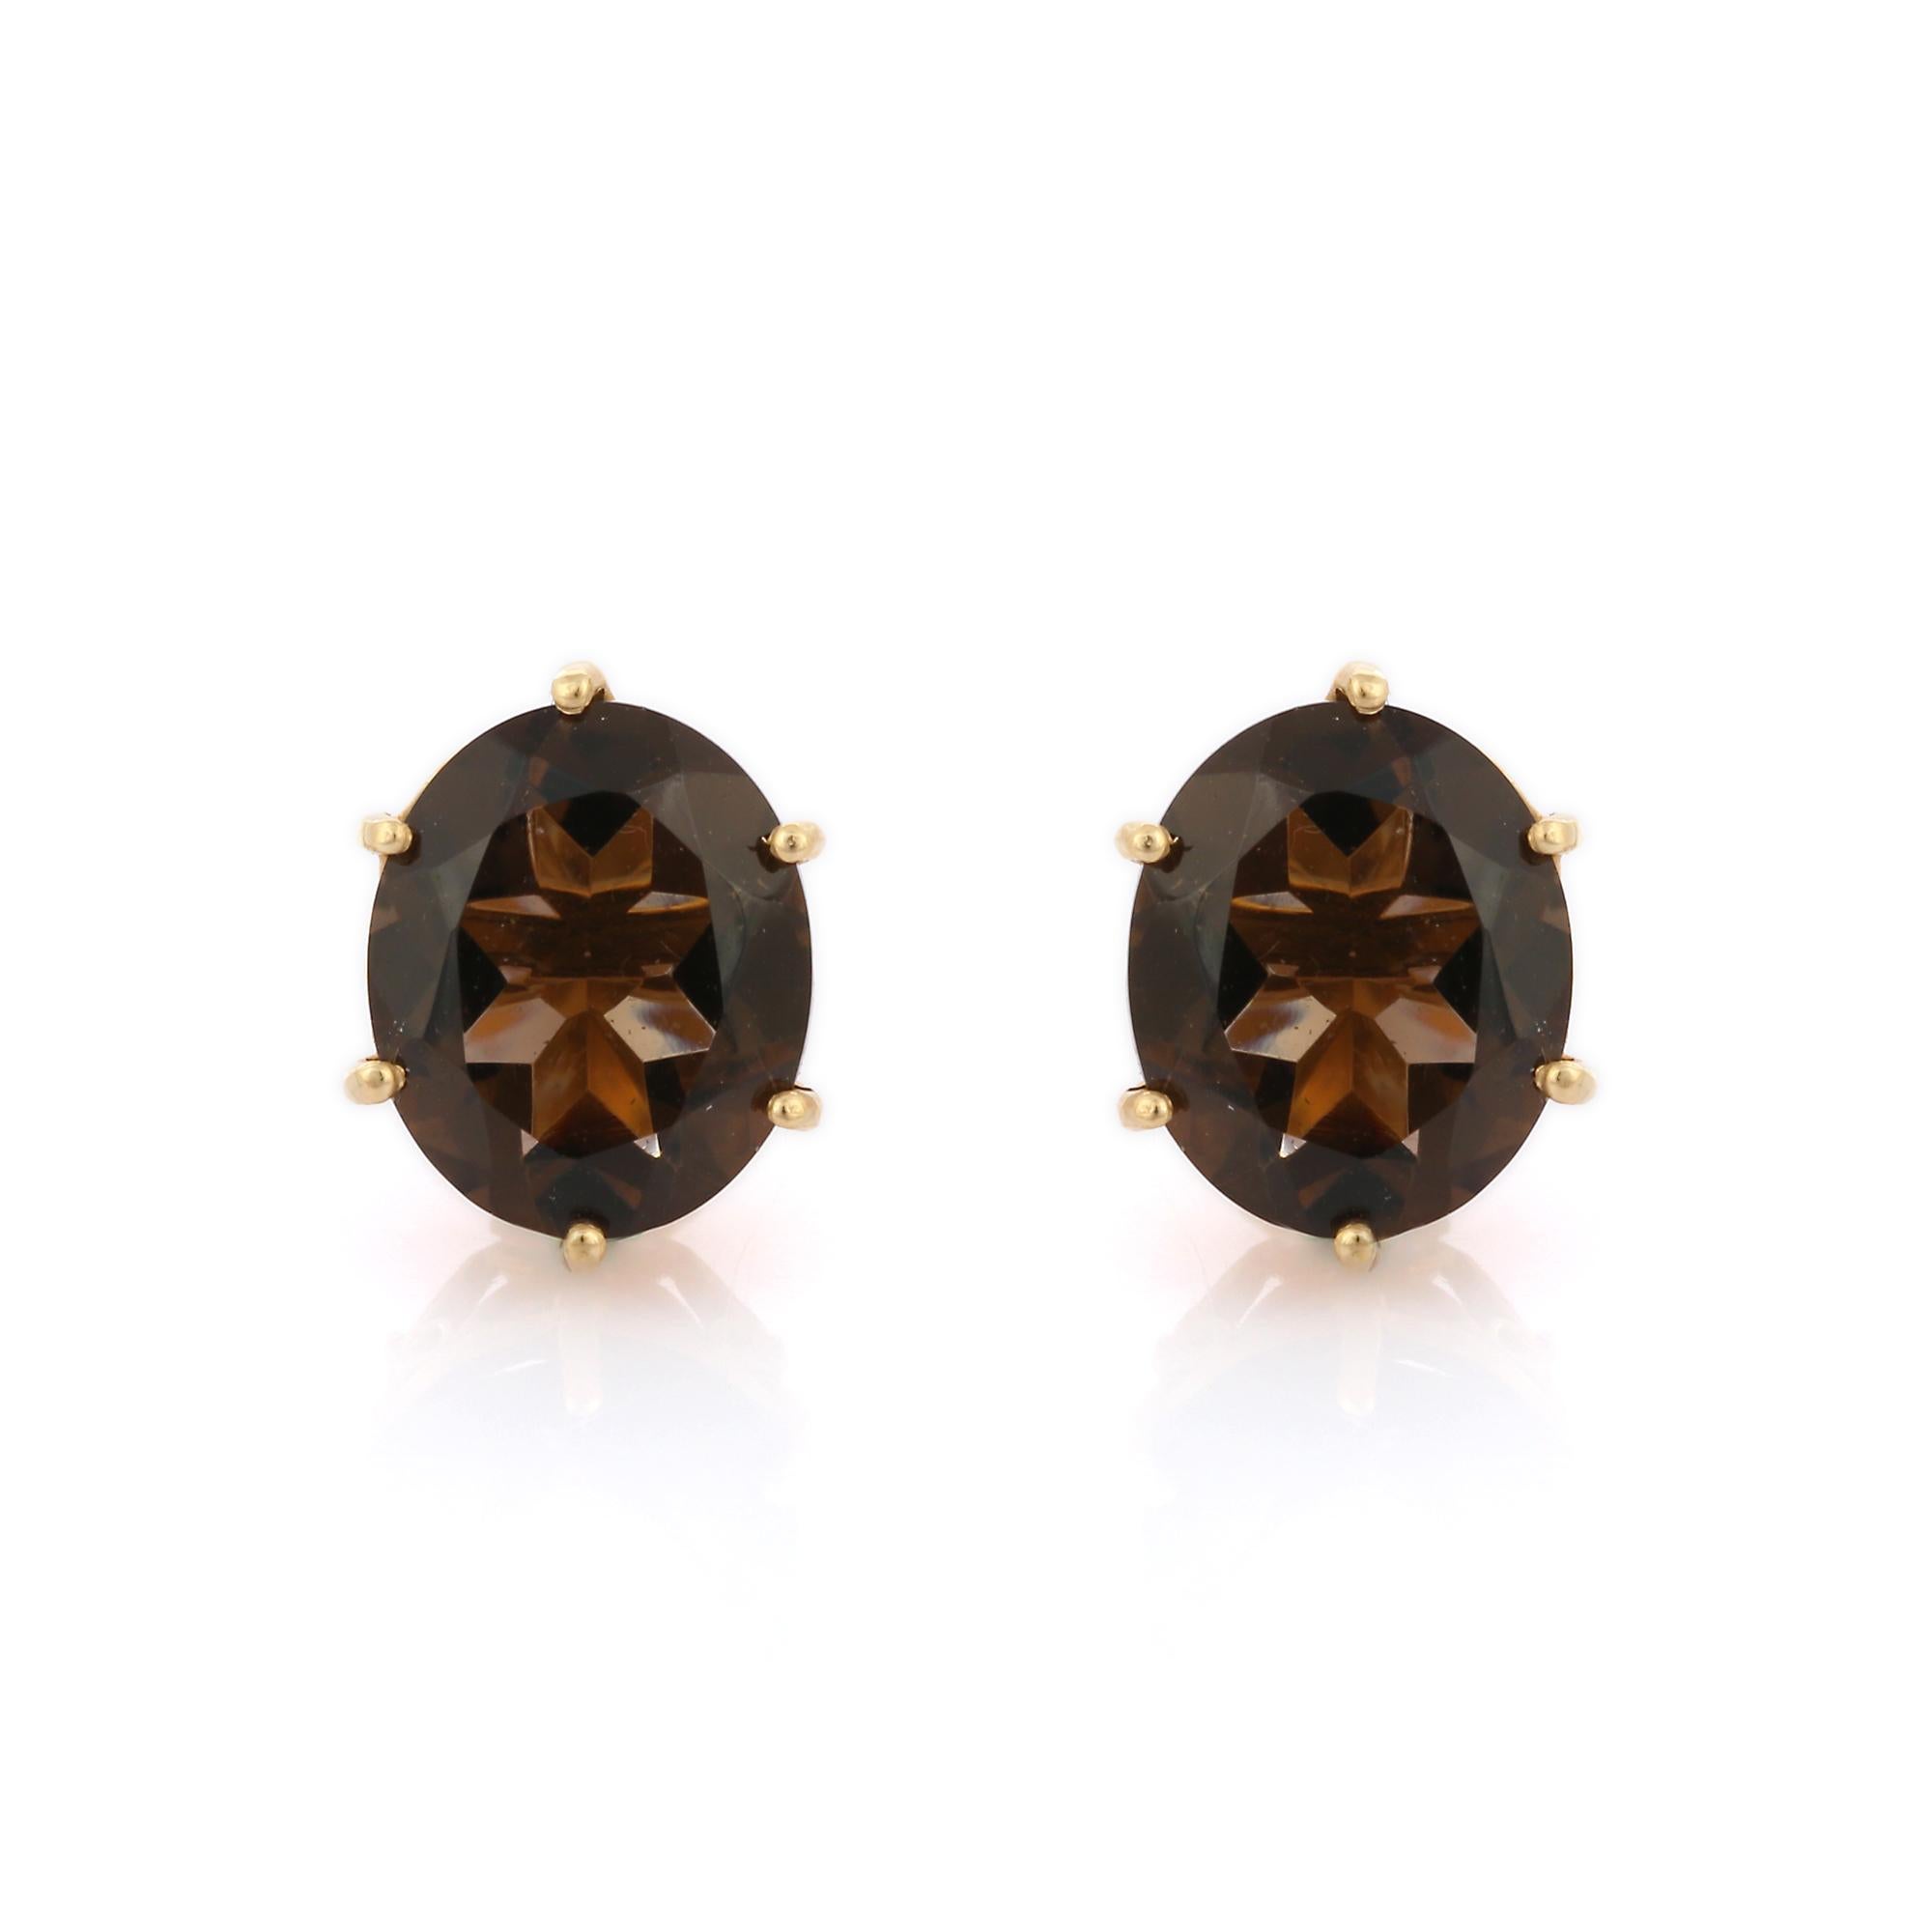 Contemporary 6.64 Carat Incised Smoky Quartz Studs Handcrafted in 14 Karat Yellow Gold For Sale